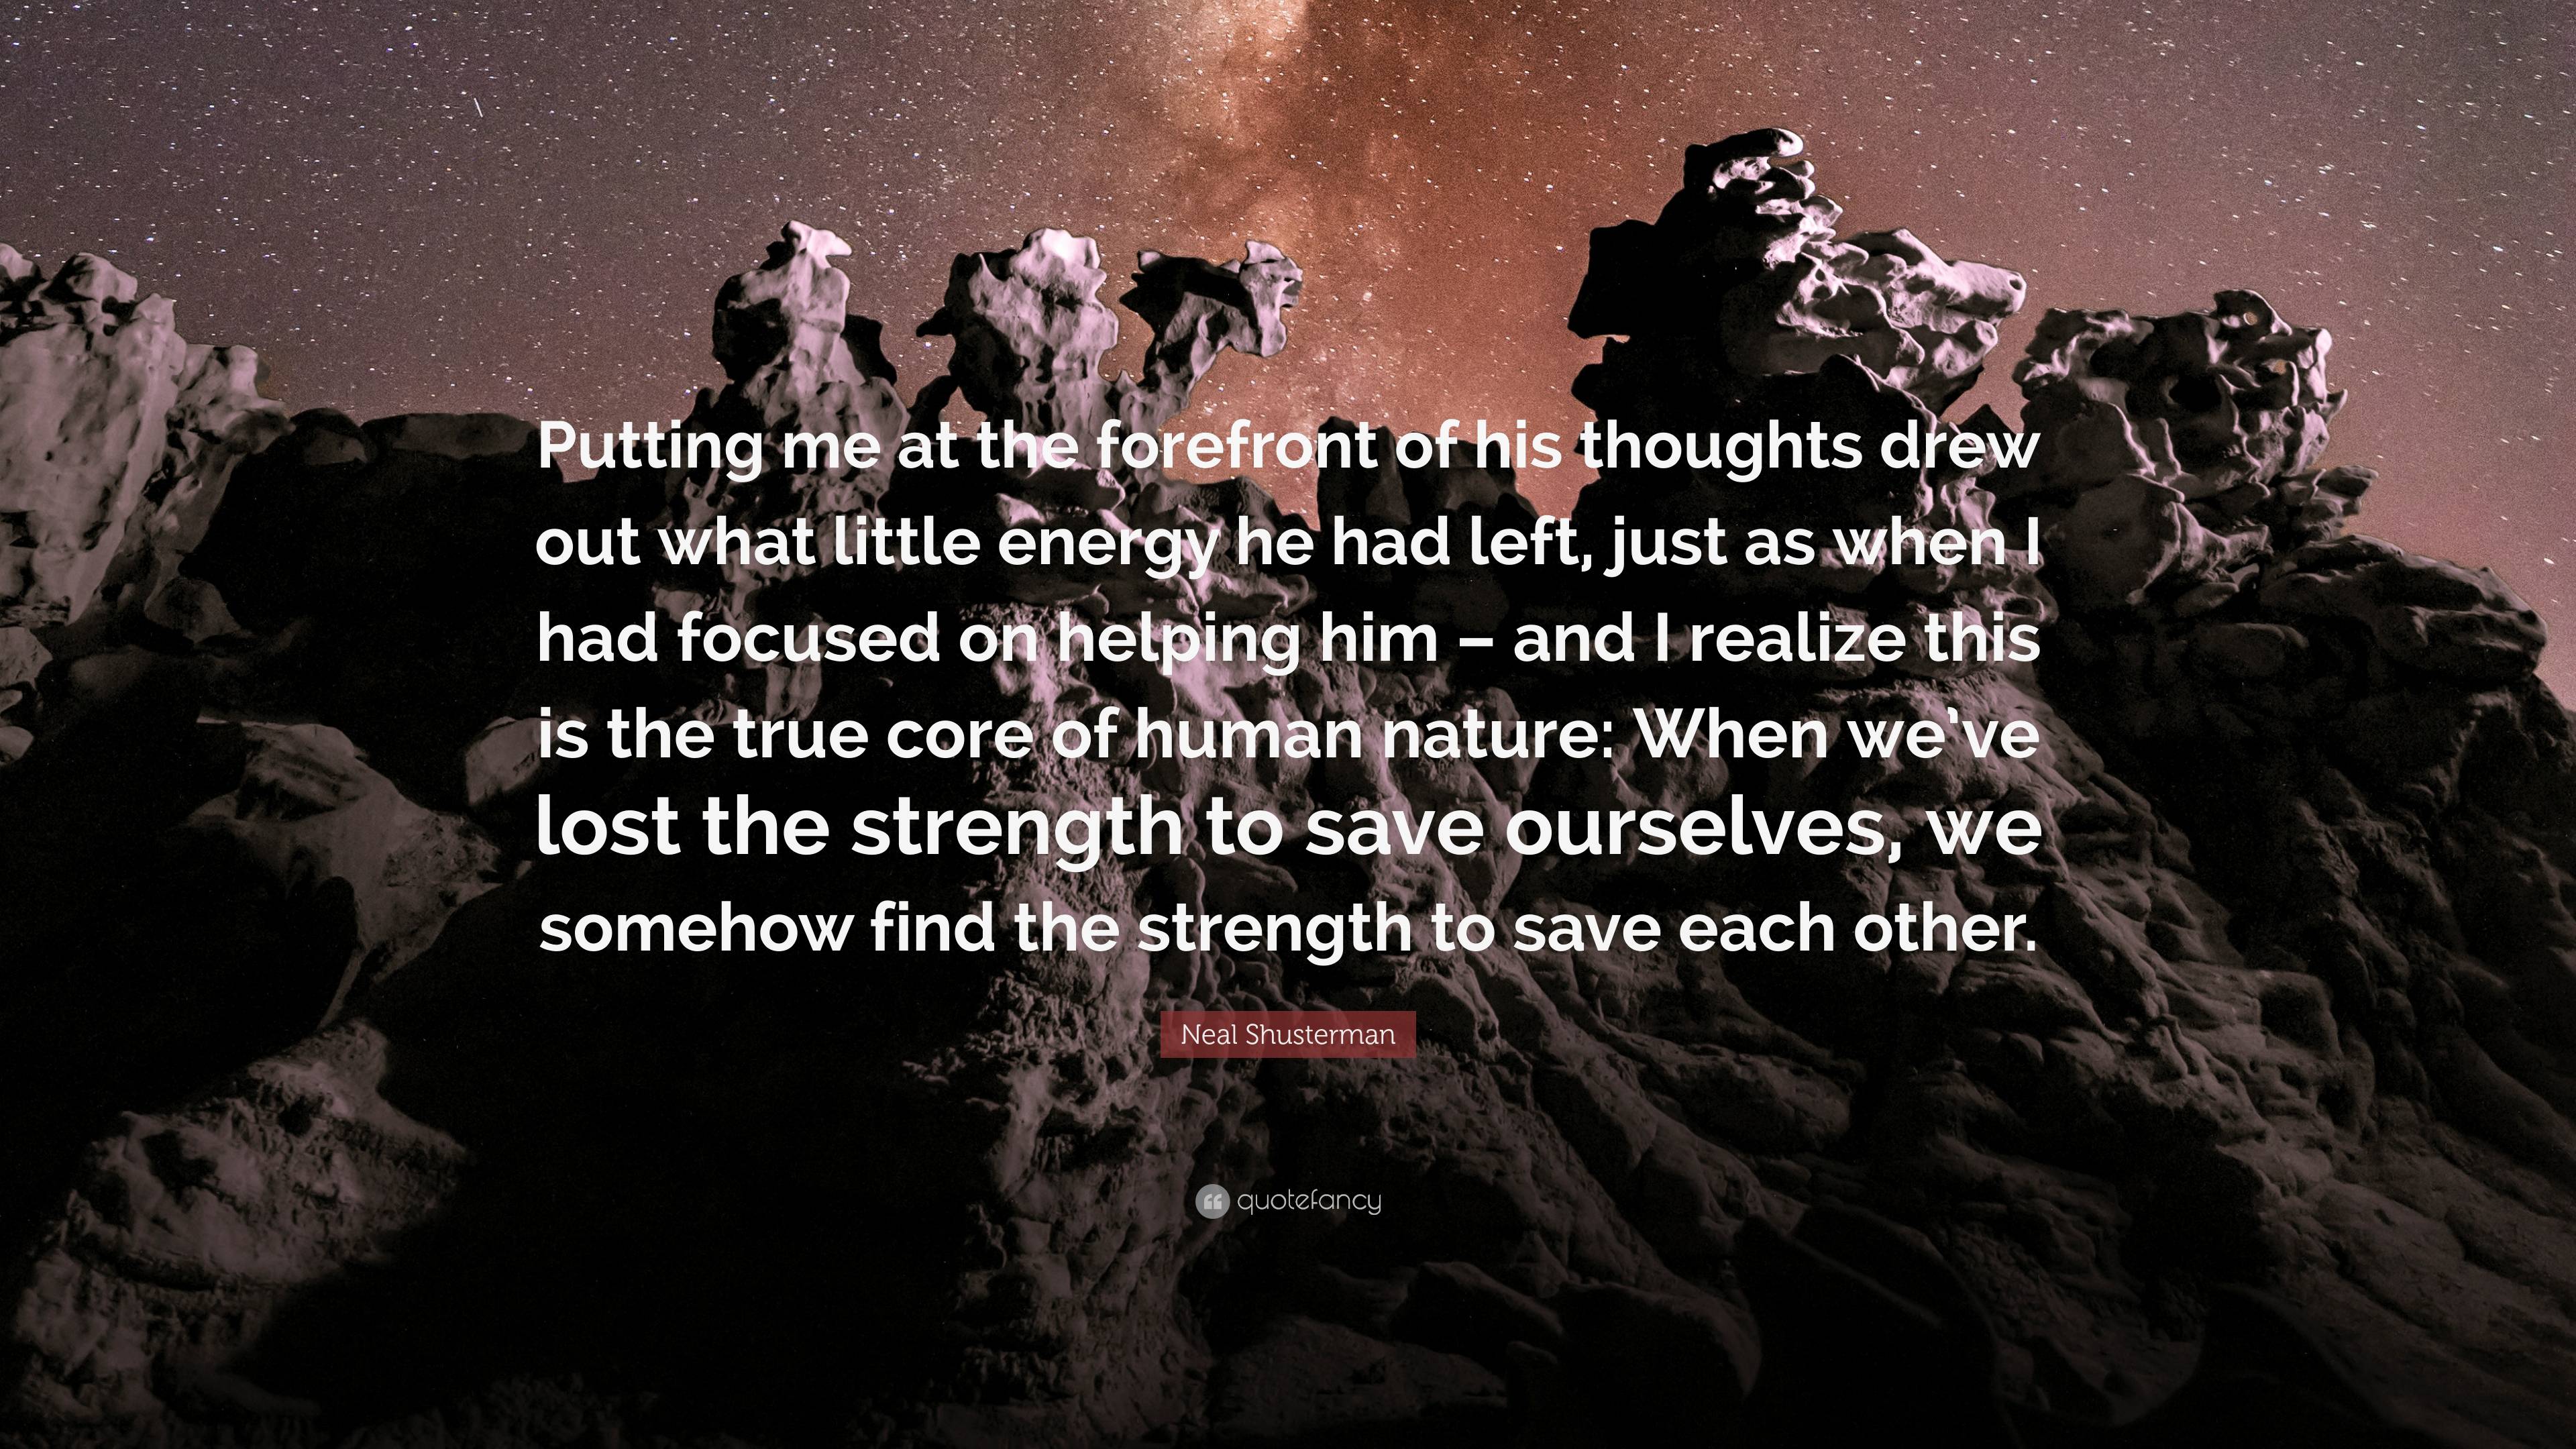 https://quotefancy.com/media/wallpaper/3840x2160/7426401-Neal-Shusterman-Quote-Putting-me-at-the-forefront-of-his-thoughts.jpg